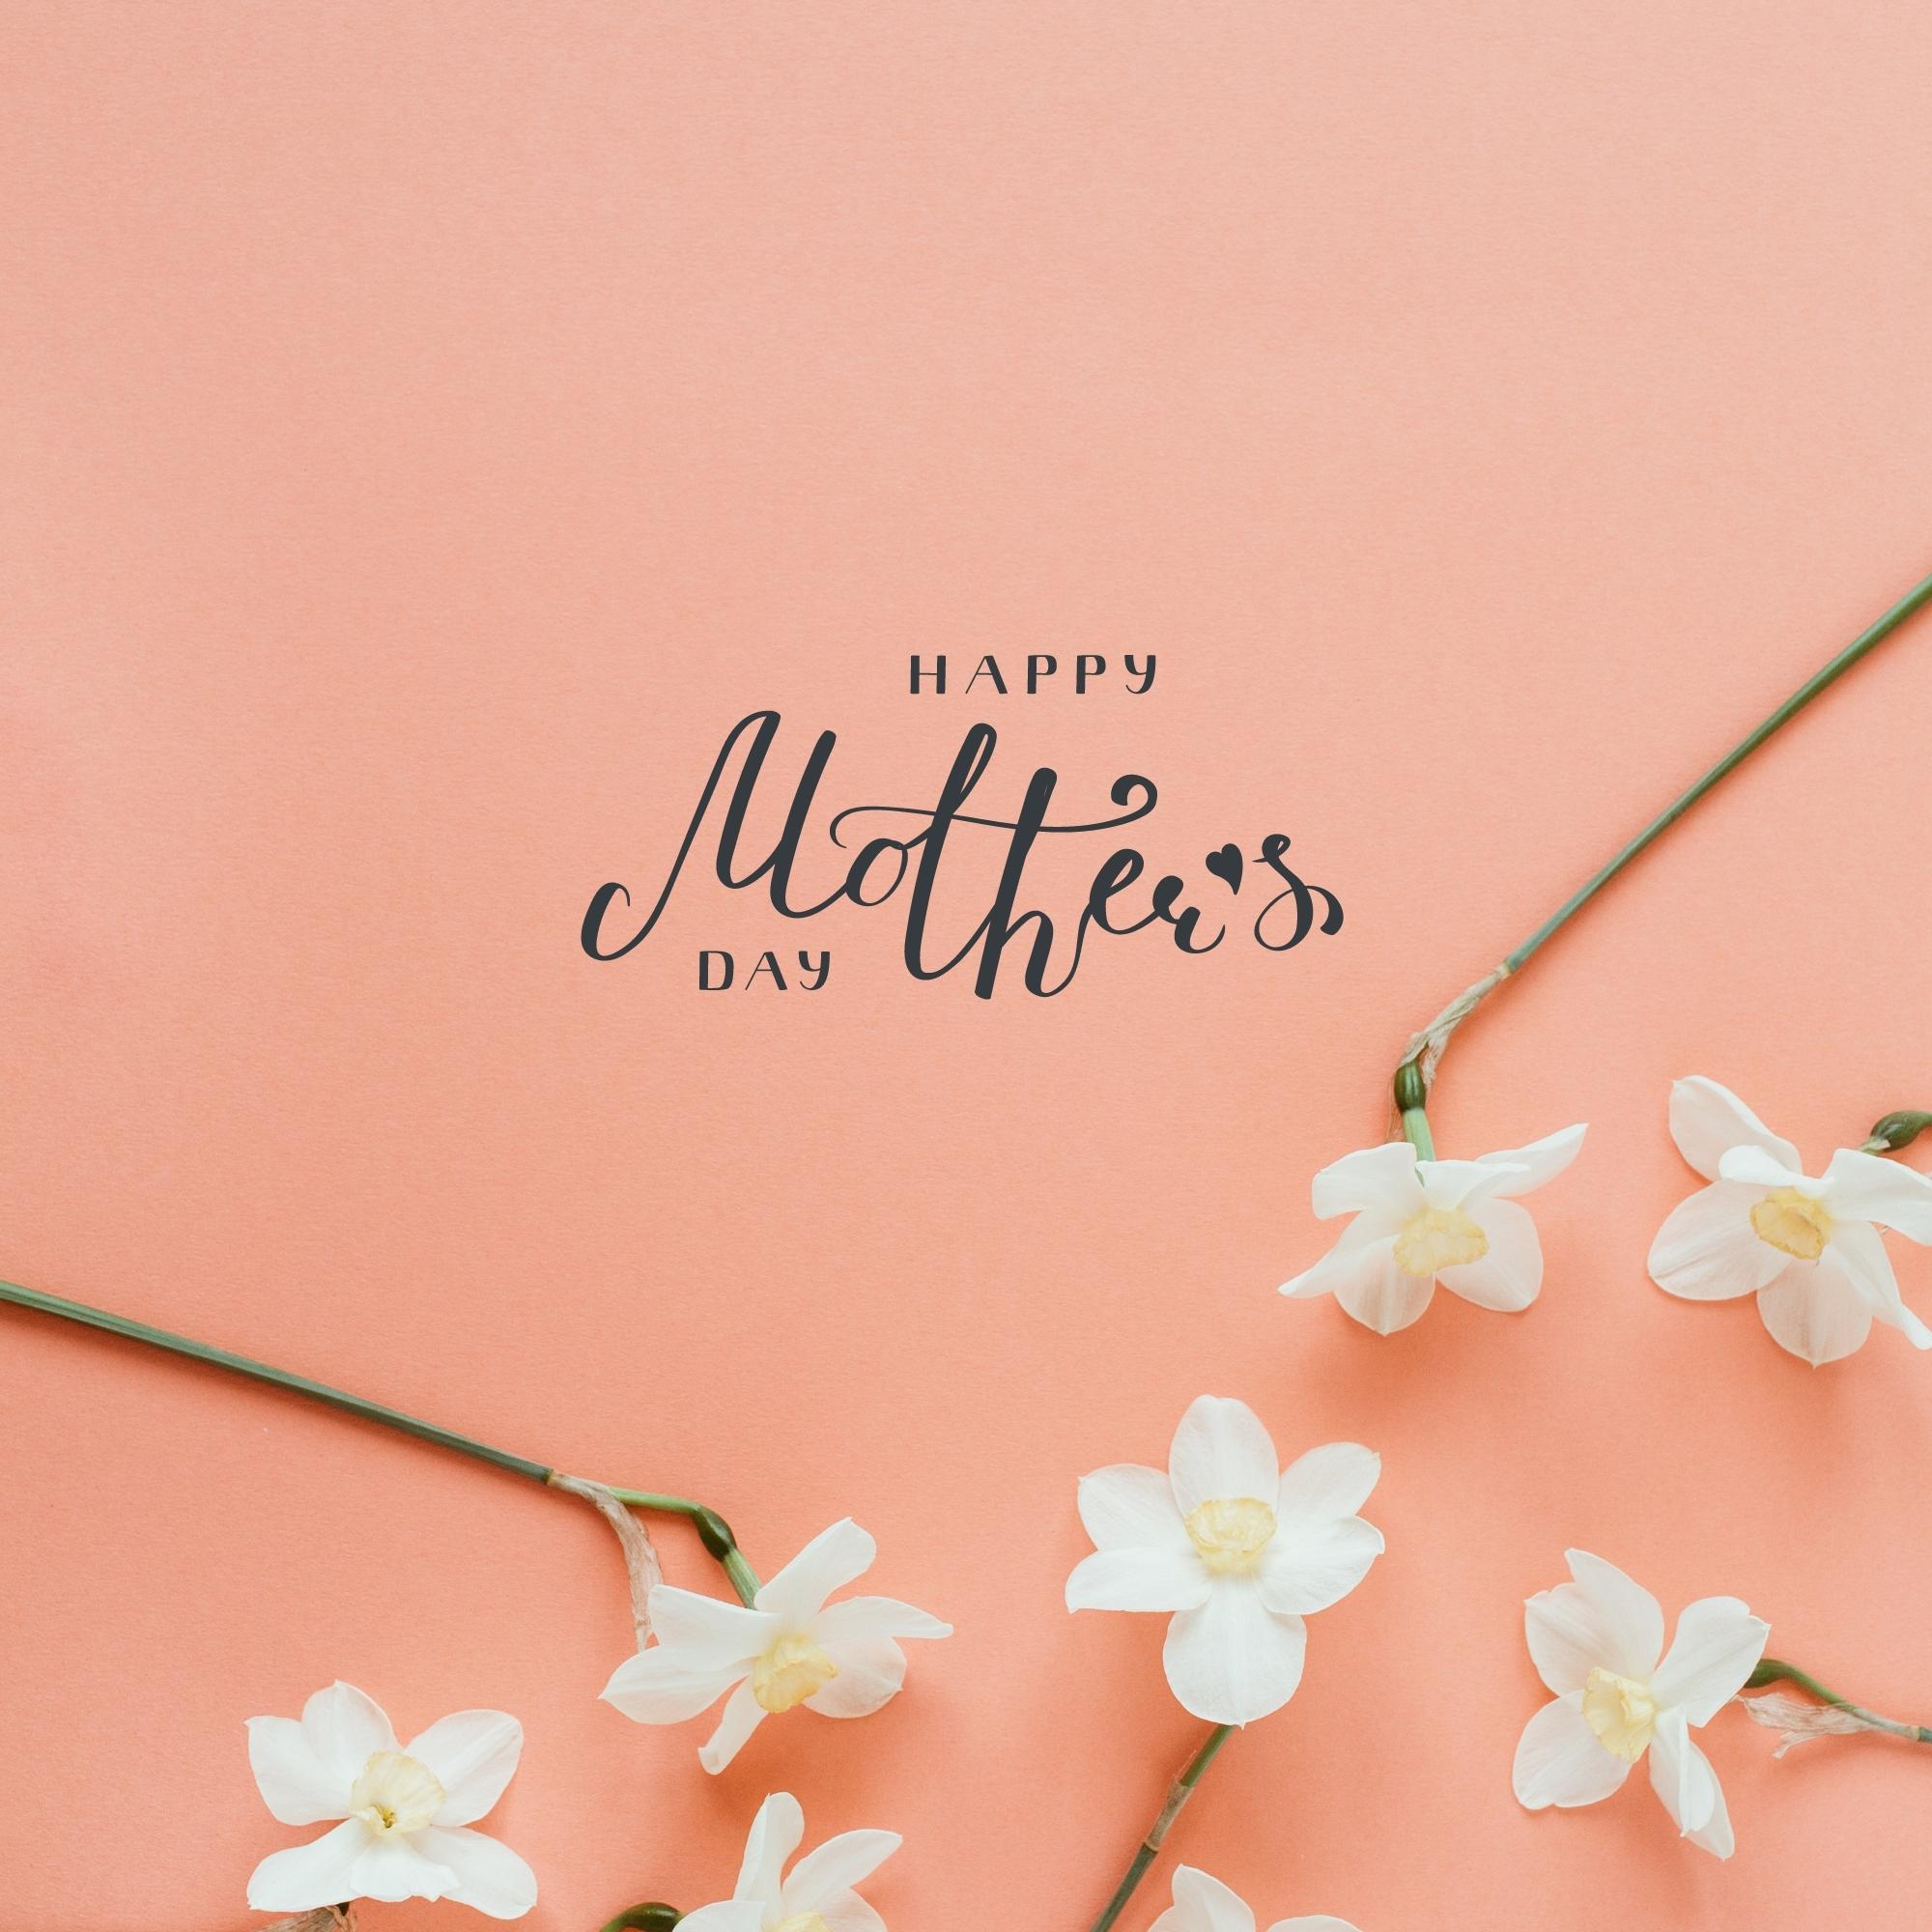 Happy Mothers Day Images | 1039 | Free Download [8k,4k,Hd]